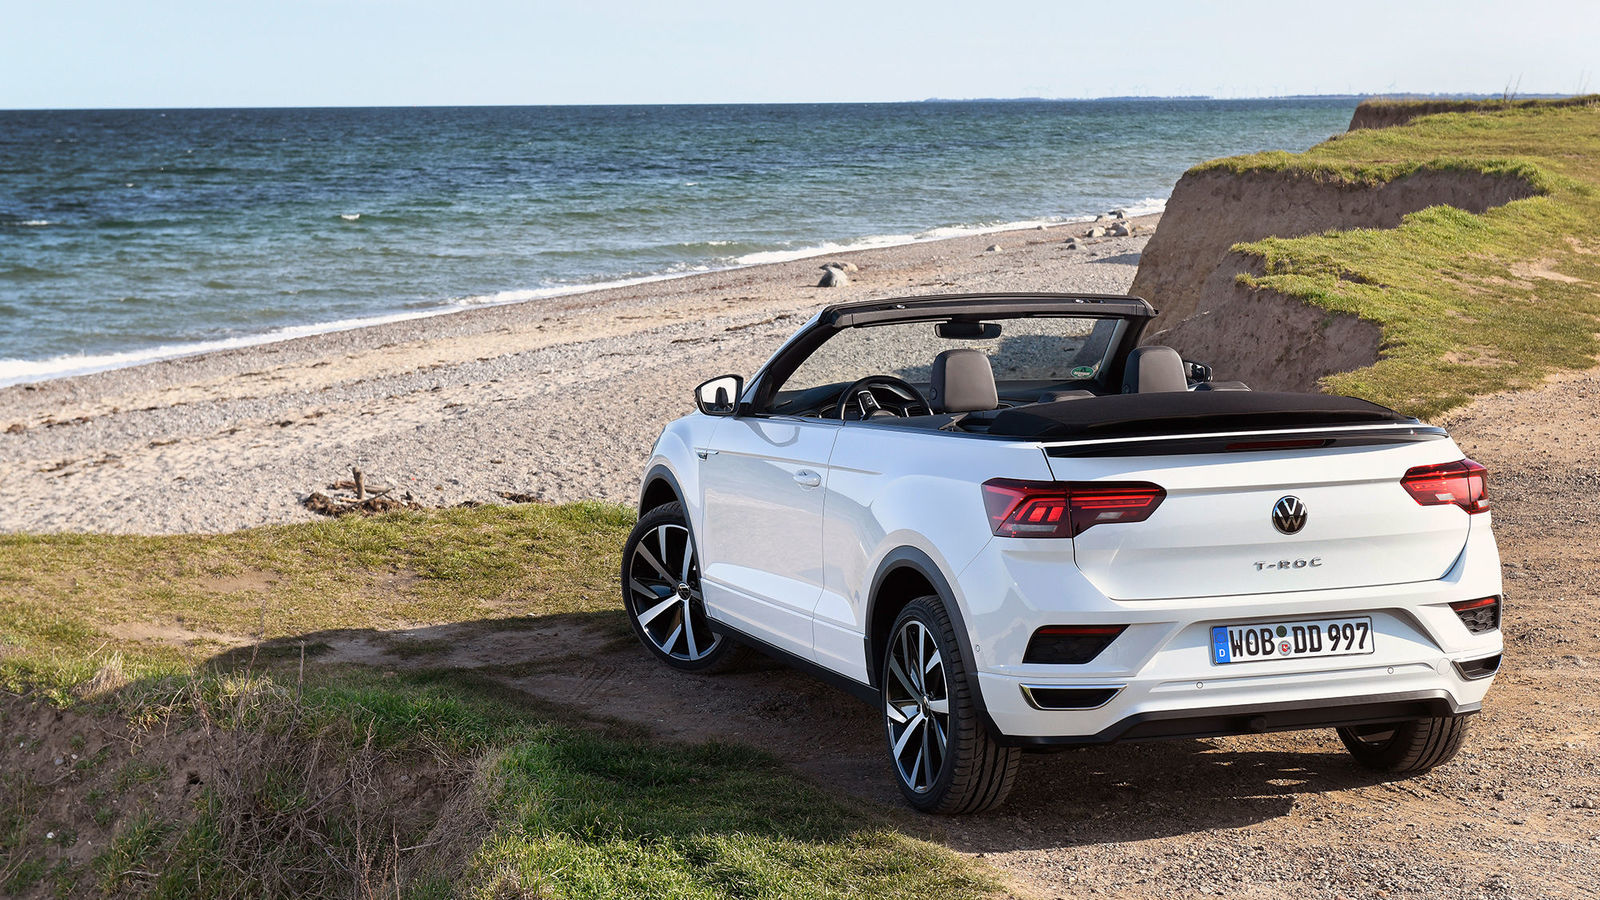 Story: “A T-Roc Cabriolet for almost any occasion”